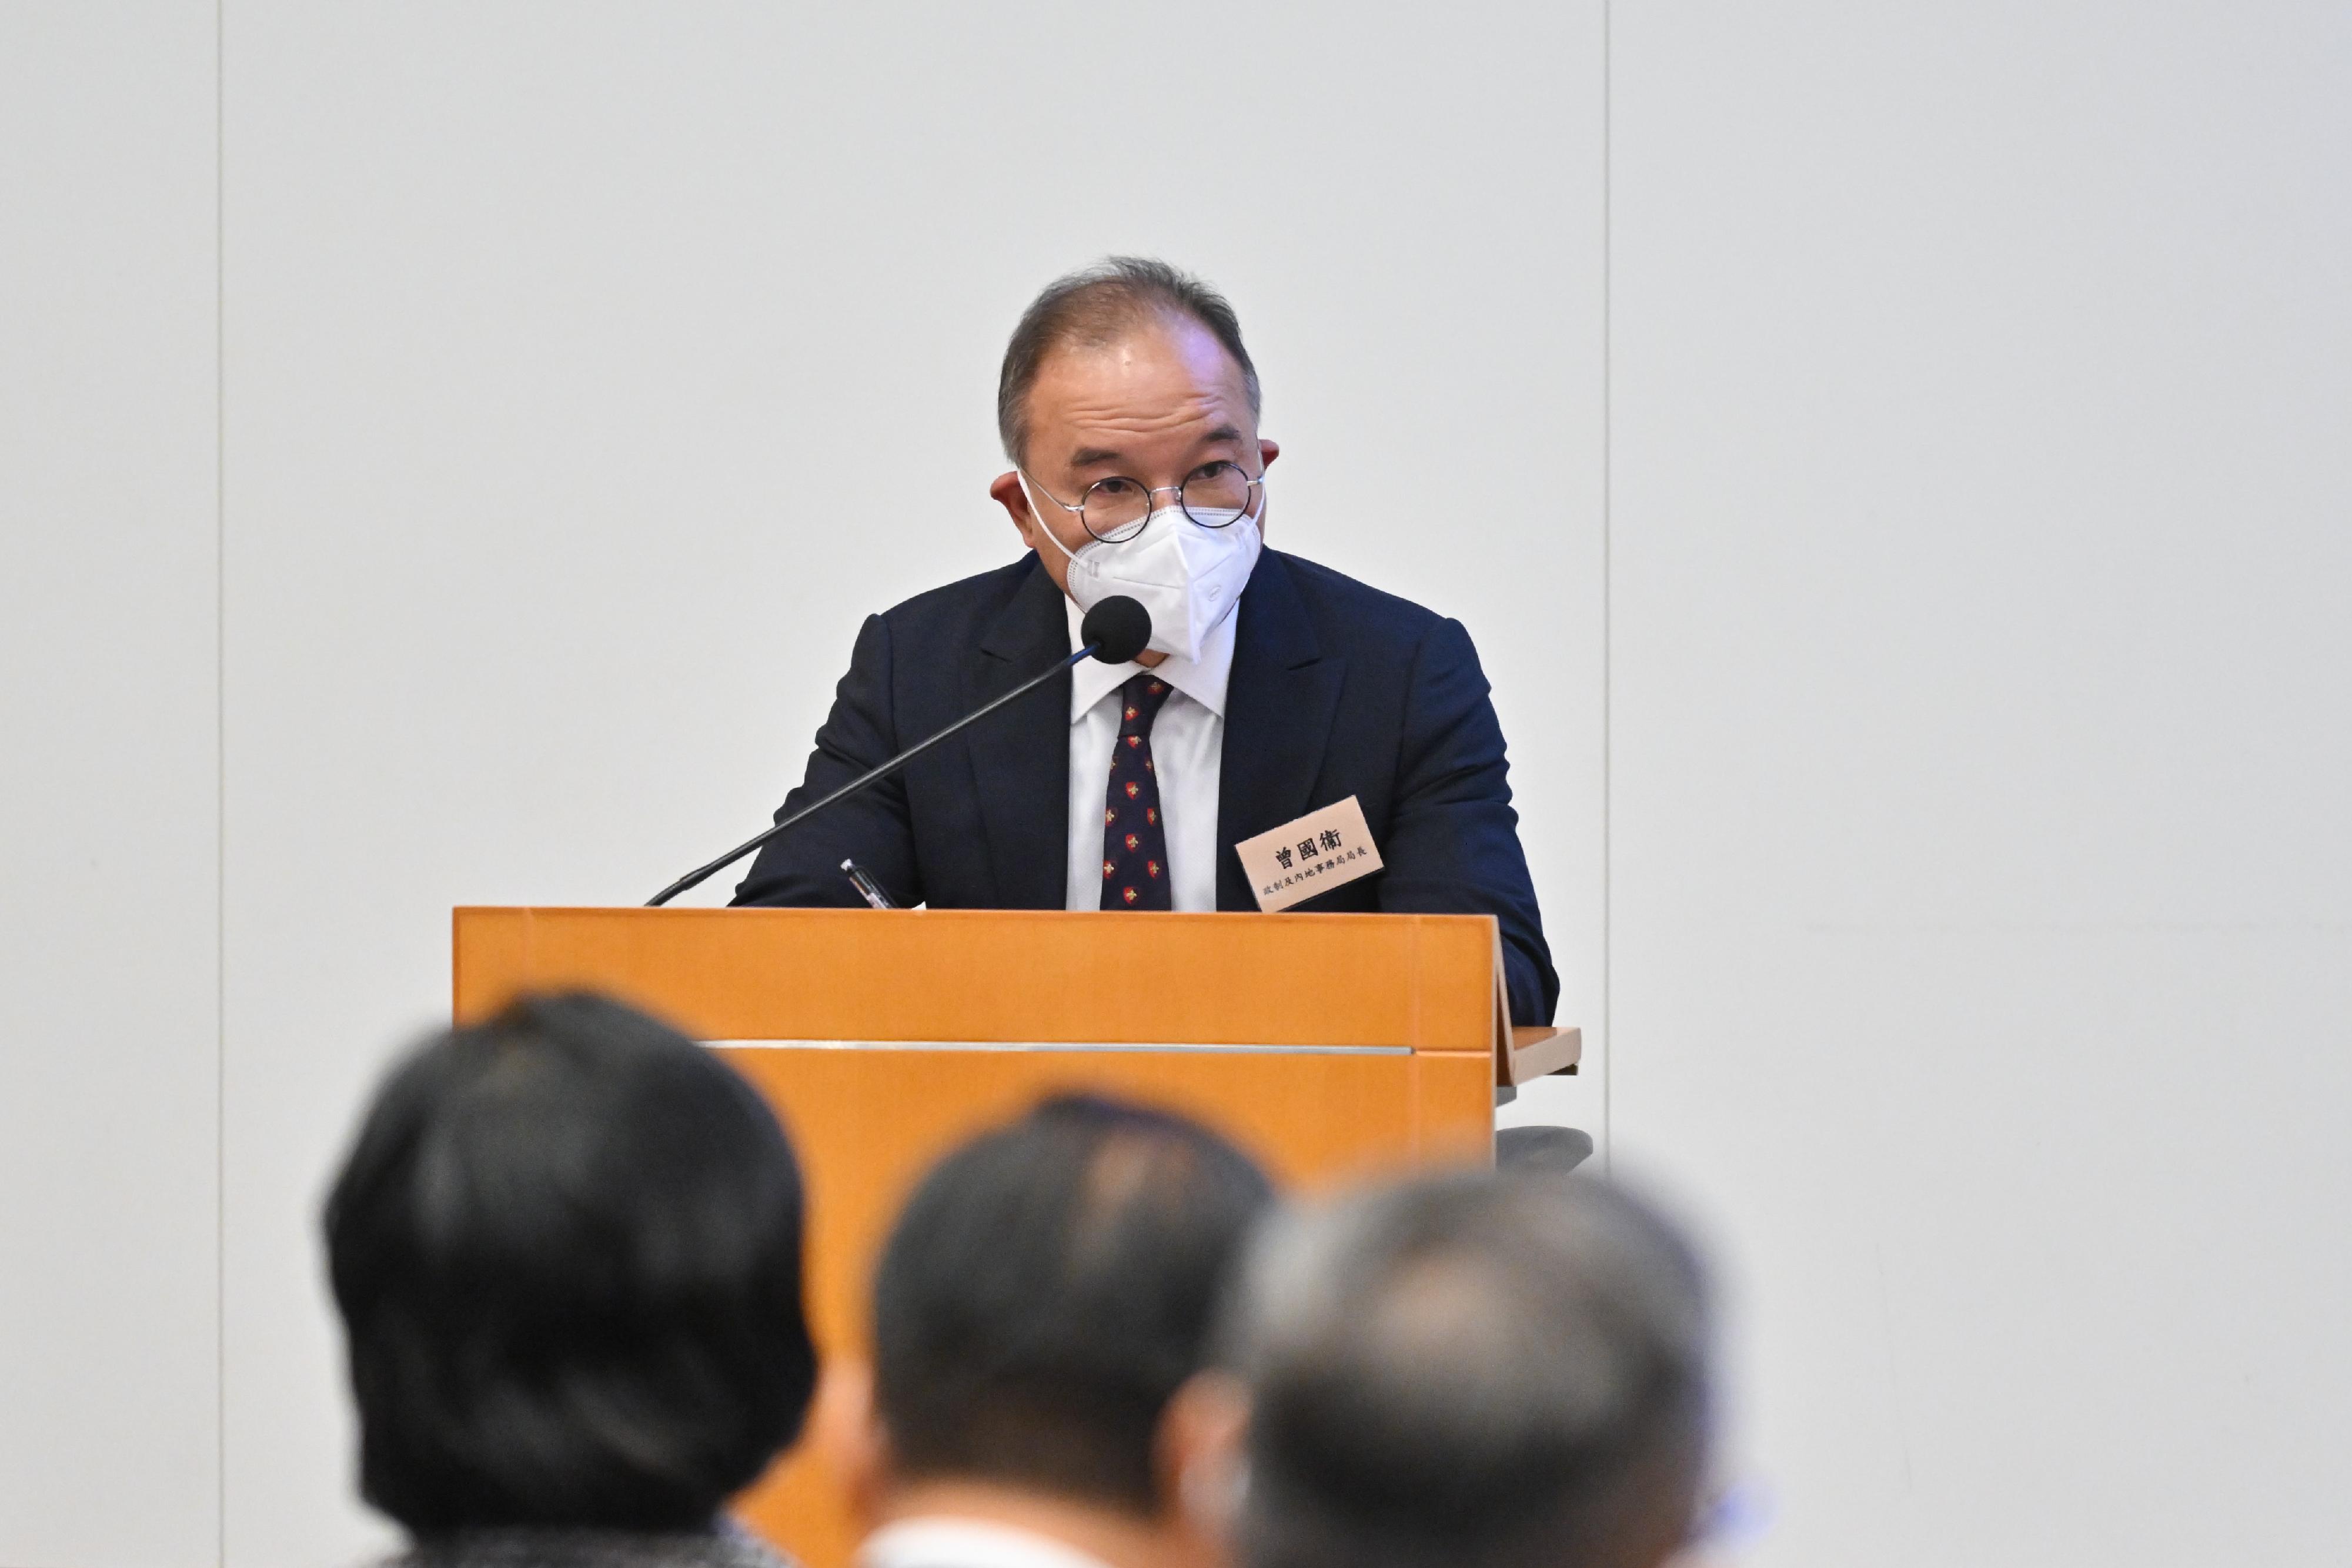 The Hong Kong Special Administrative Region Government today (November 16) held a sharing session on the spirit of the 20th National Congress of the Communist Party of China at the Central Government Offices. Photo shows the Secretary for Constitutional and Mainland Affairs, Mr Erick Tsang Kwok-wai, sharing his views.